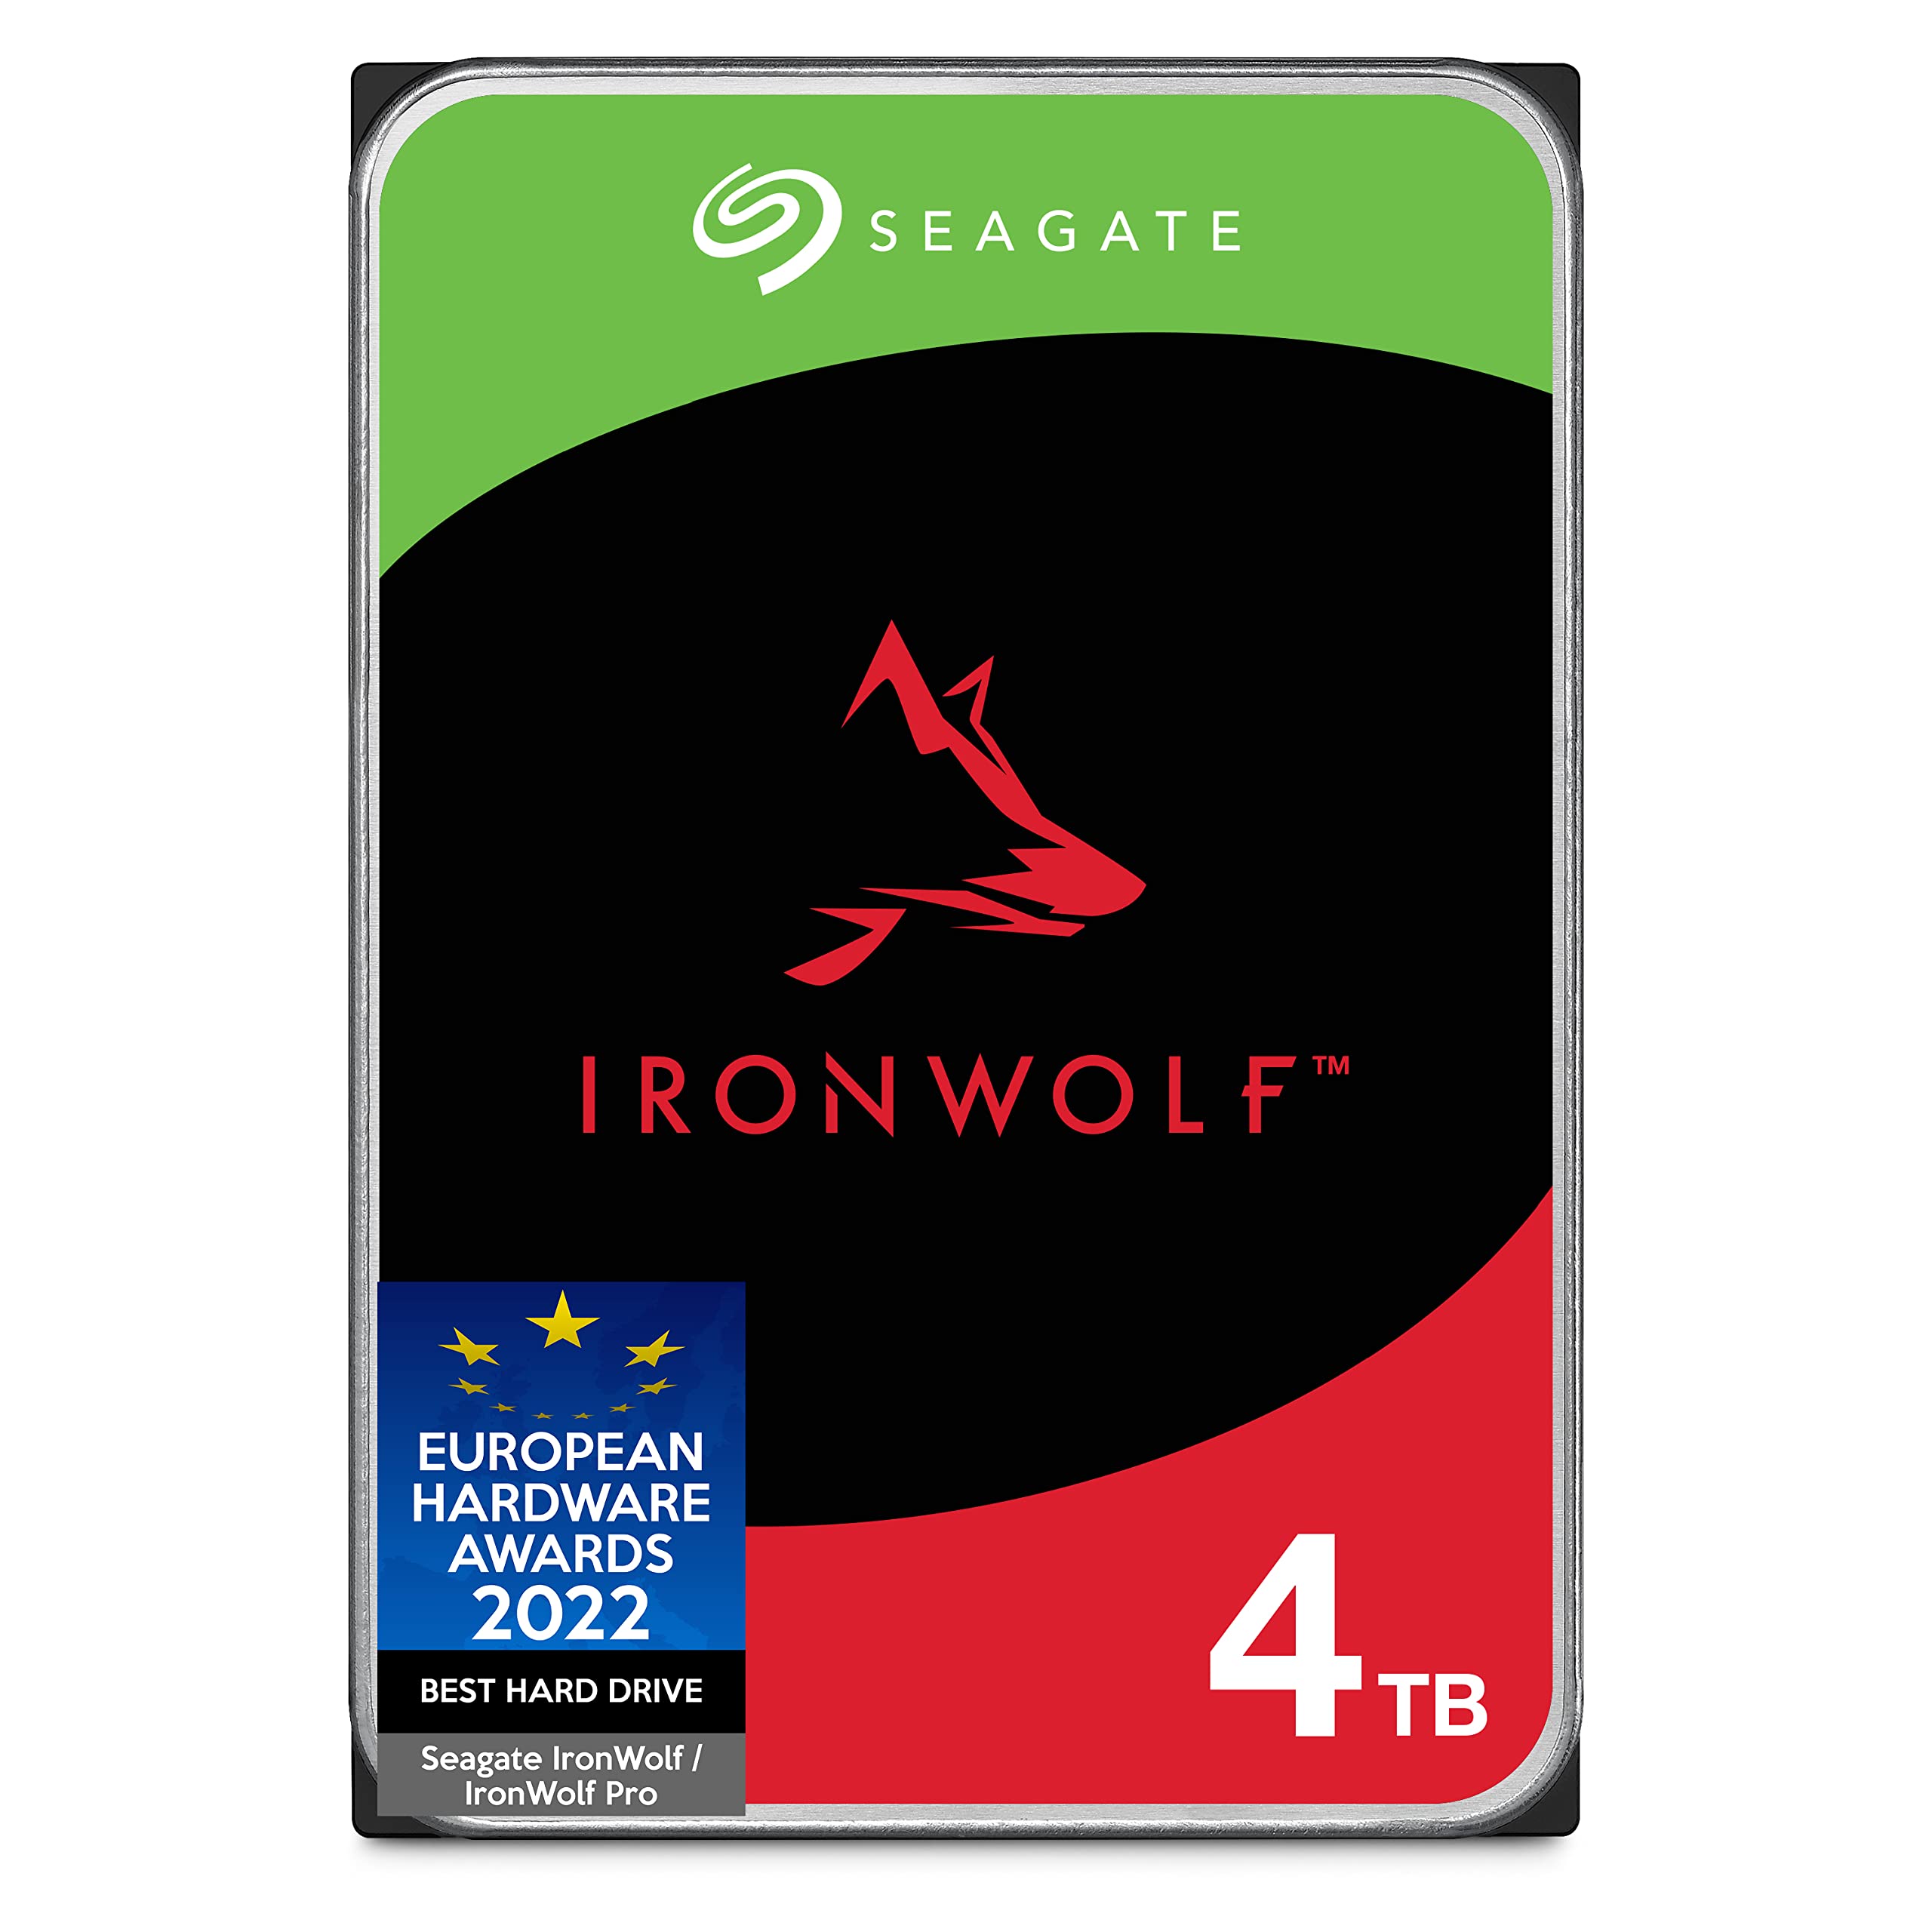 Seagate IronWolf 4TB NAS Internal Hard Drive HDD – CMR 3.5 Inch SATA 6Gb/s 5400 RPM 64MB Cache for RAID Network Attached Storage, Rescue Services – Frustration Free Packaging (ST4000VNZ06)